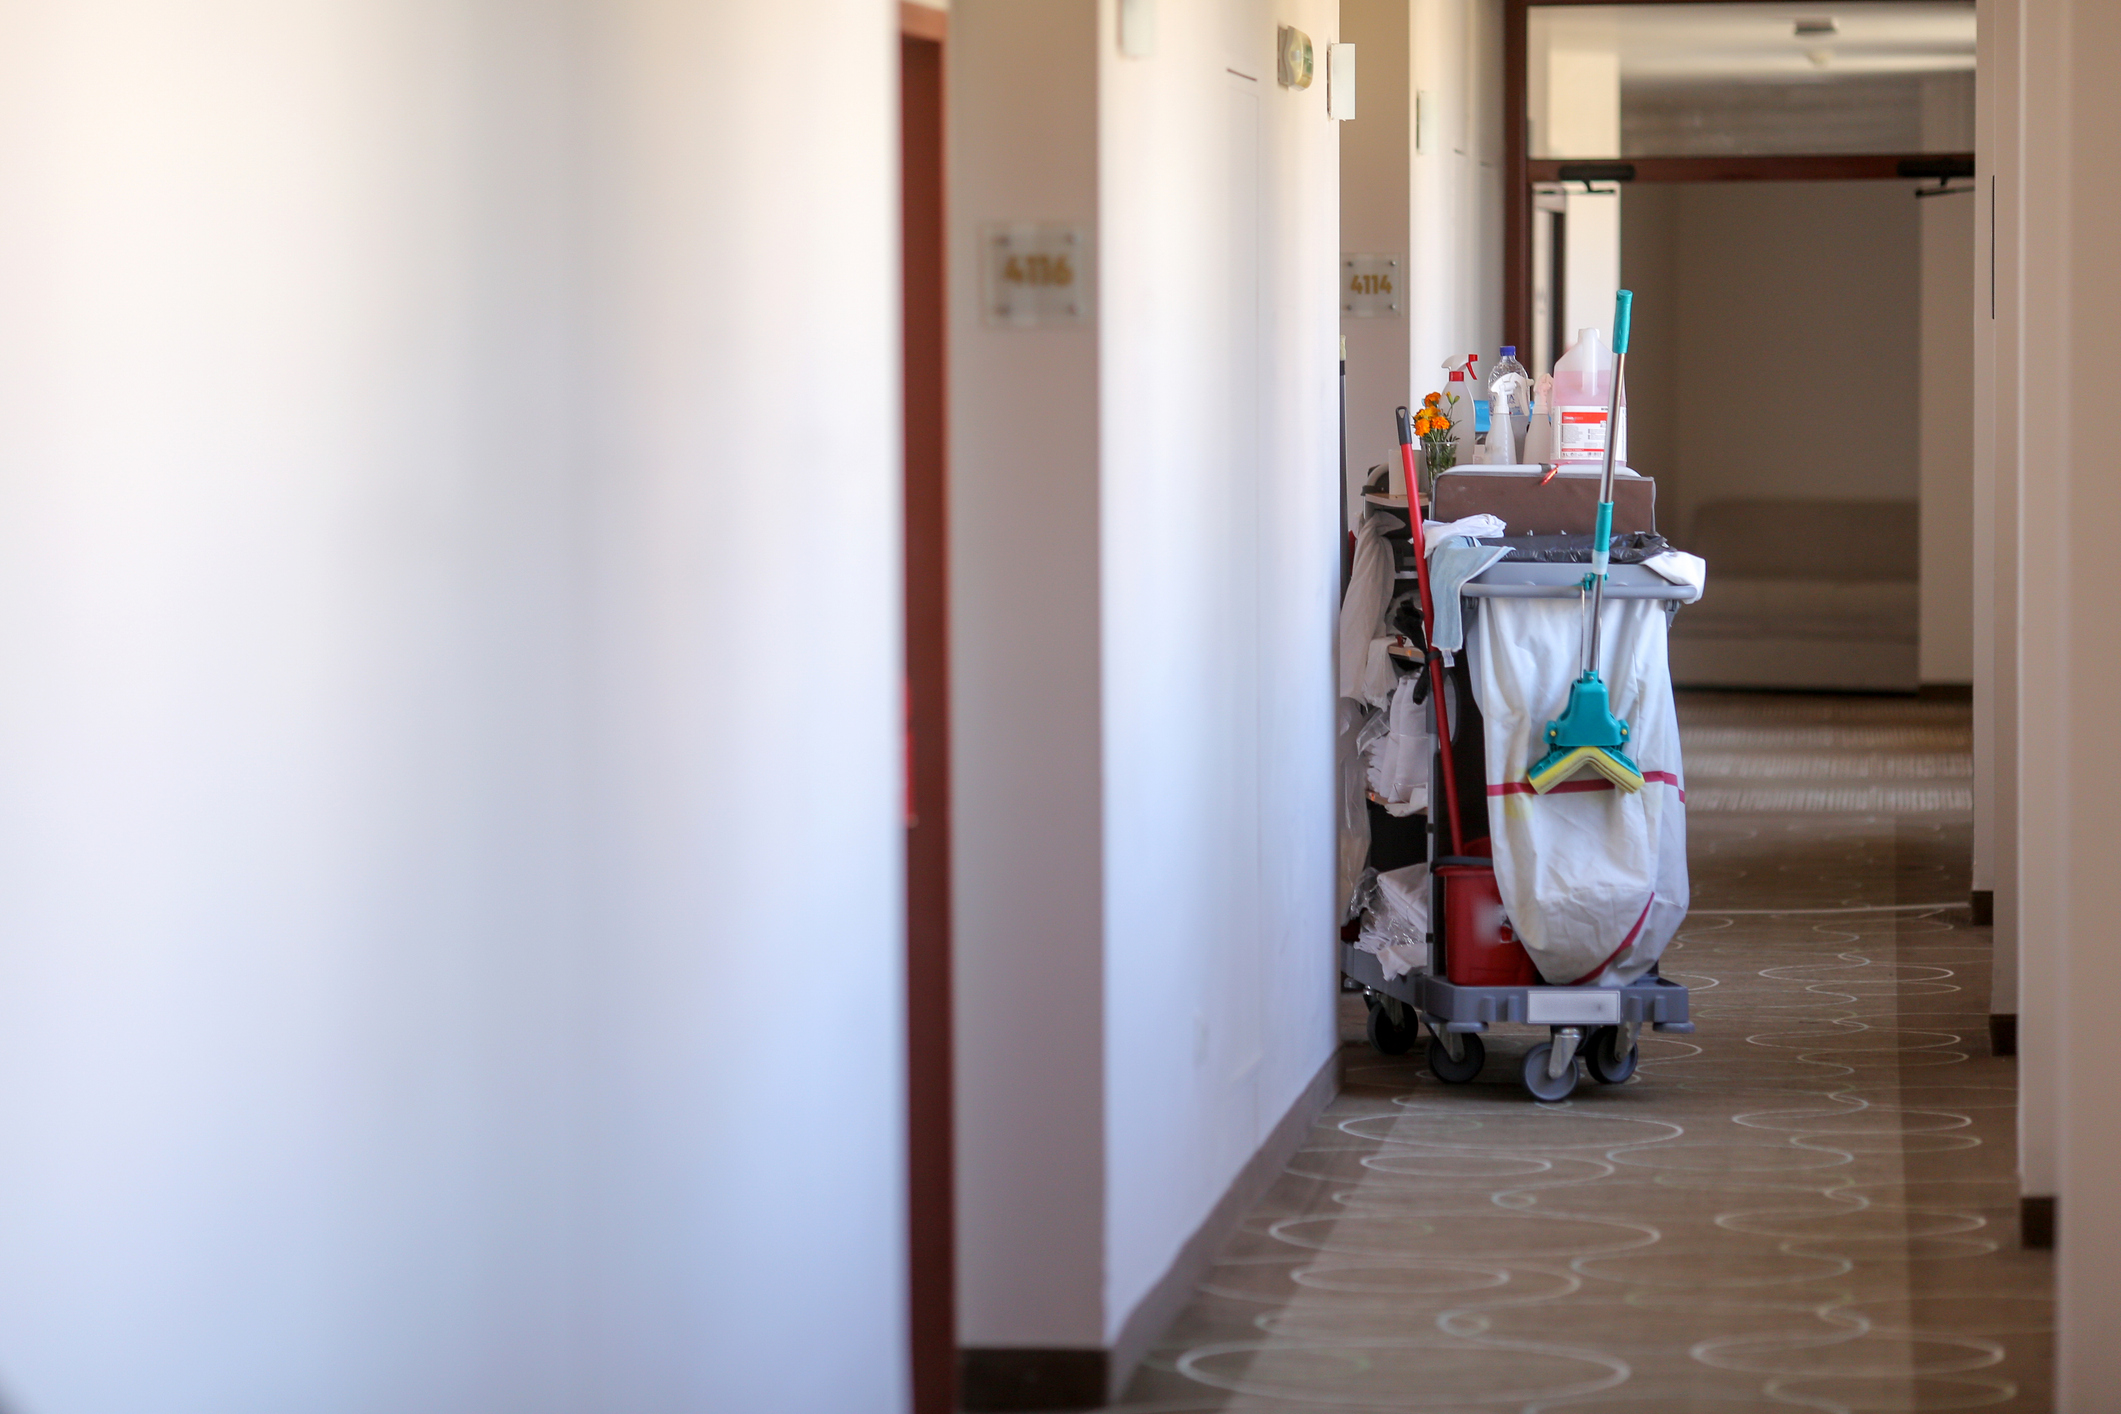 Photograph of a full hotel cleaner's cart in the empty hallway of a hotel.